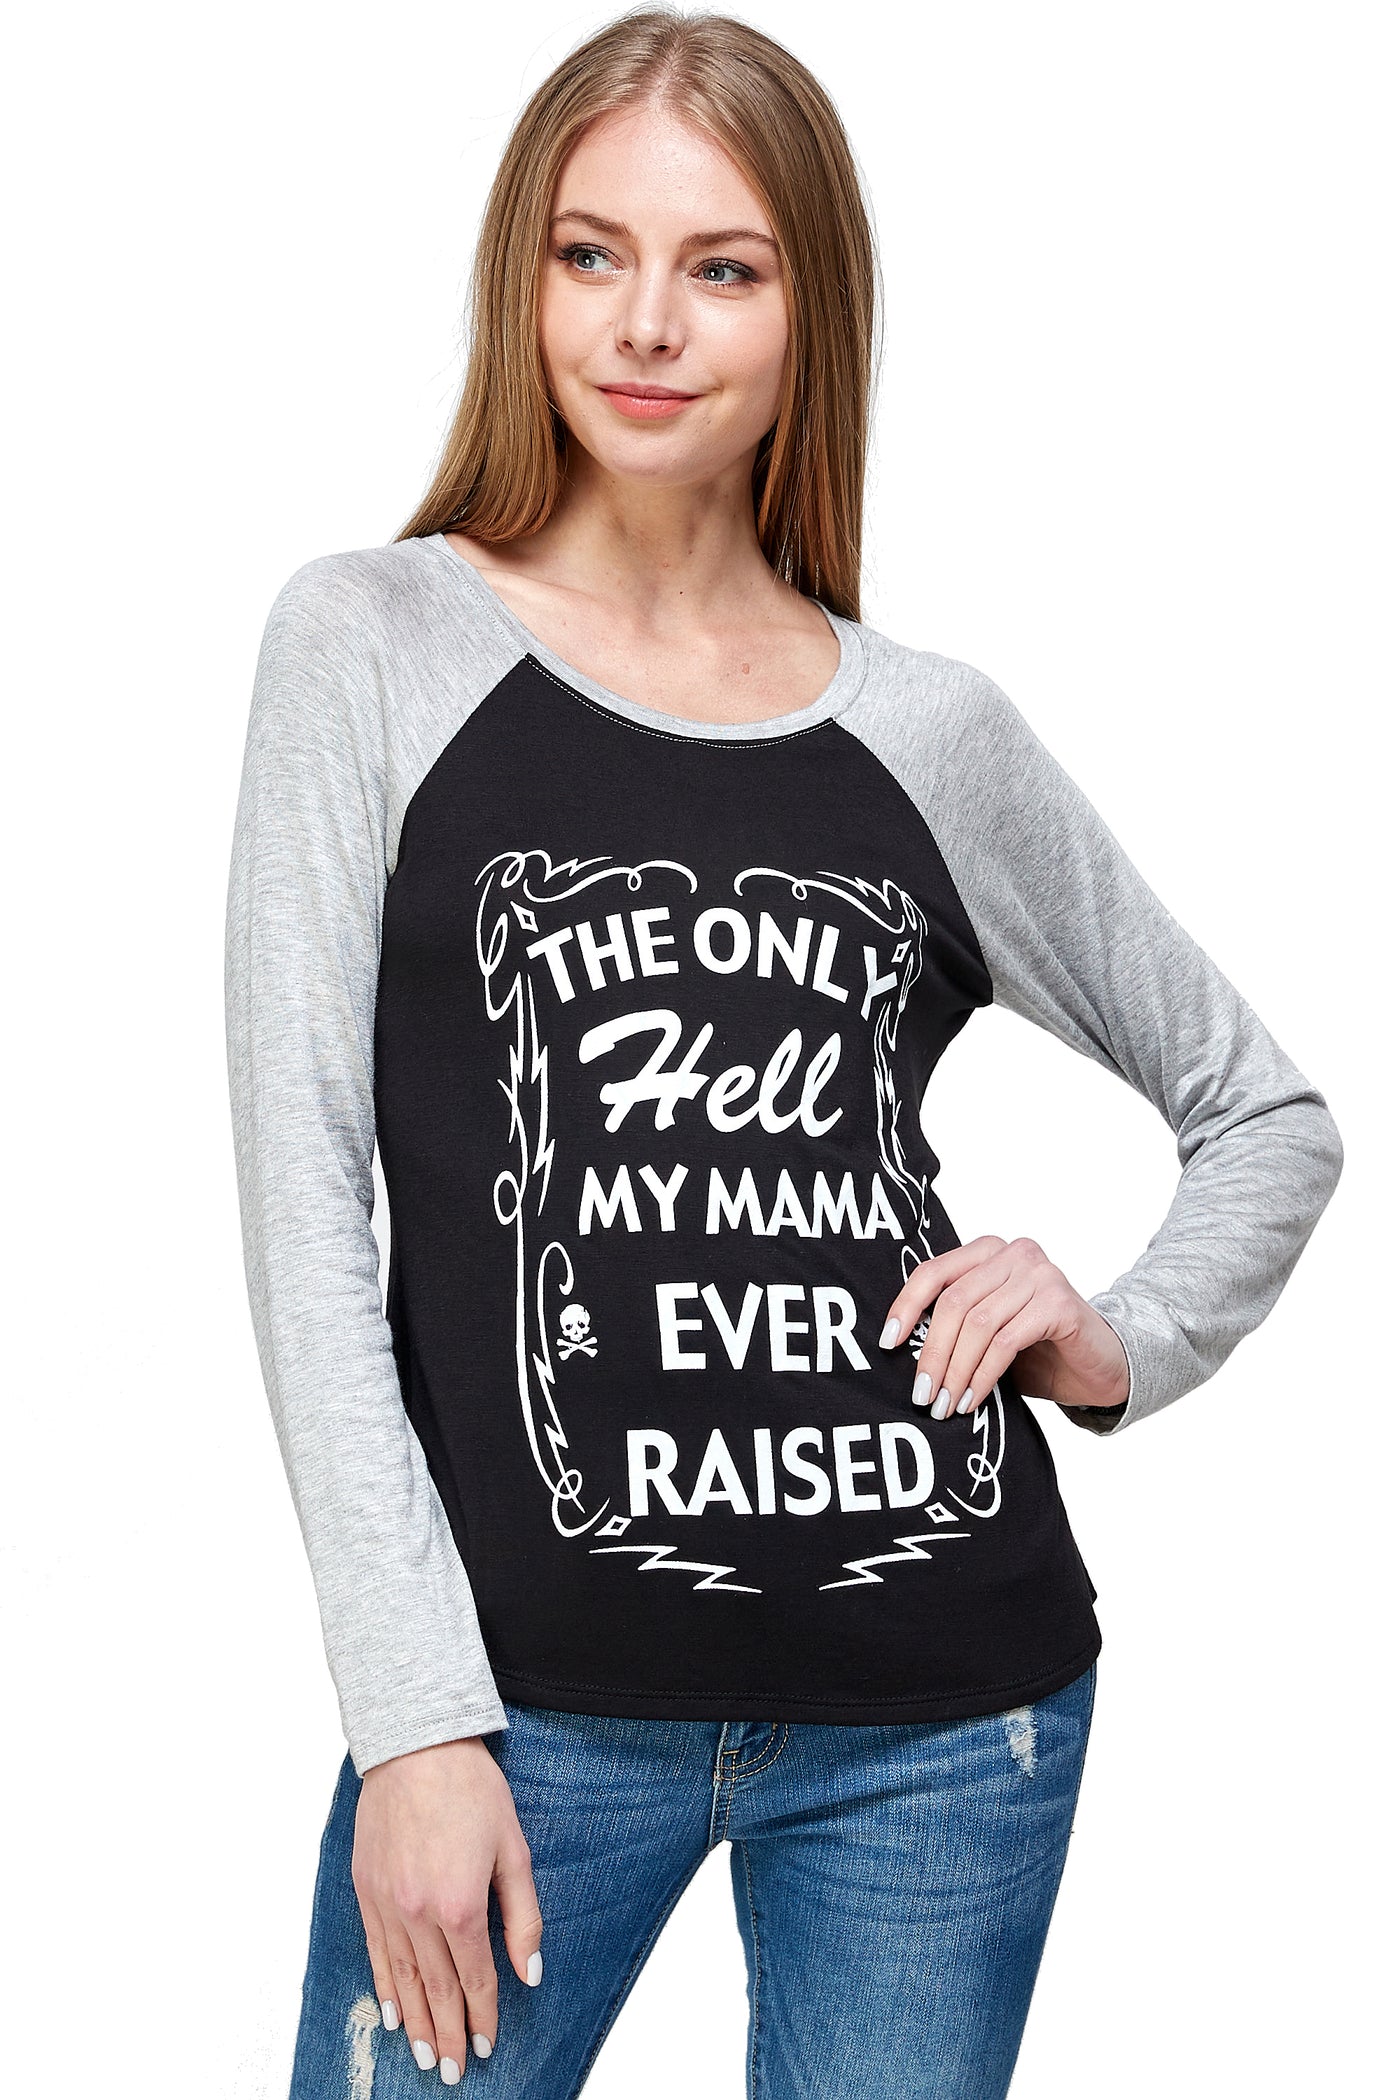 THE ONLY HELL MY MAMA EVER RAISED LONG SLEEVE RAGLAN SHIRT - Trailsclothing.com